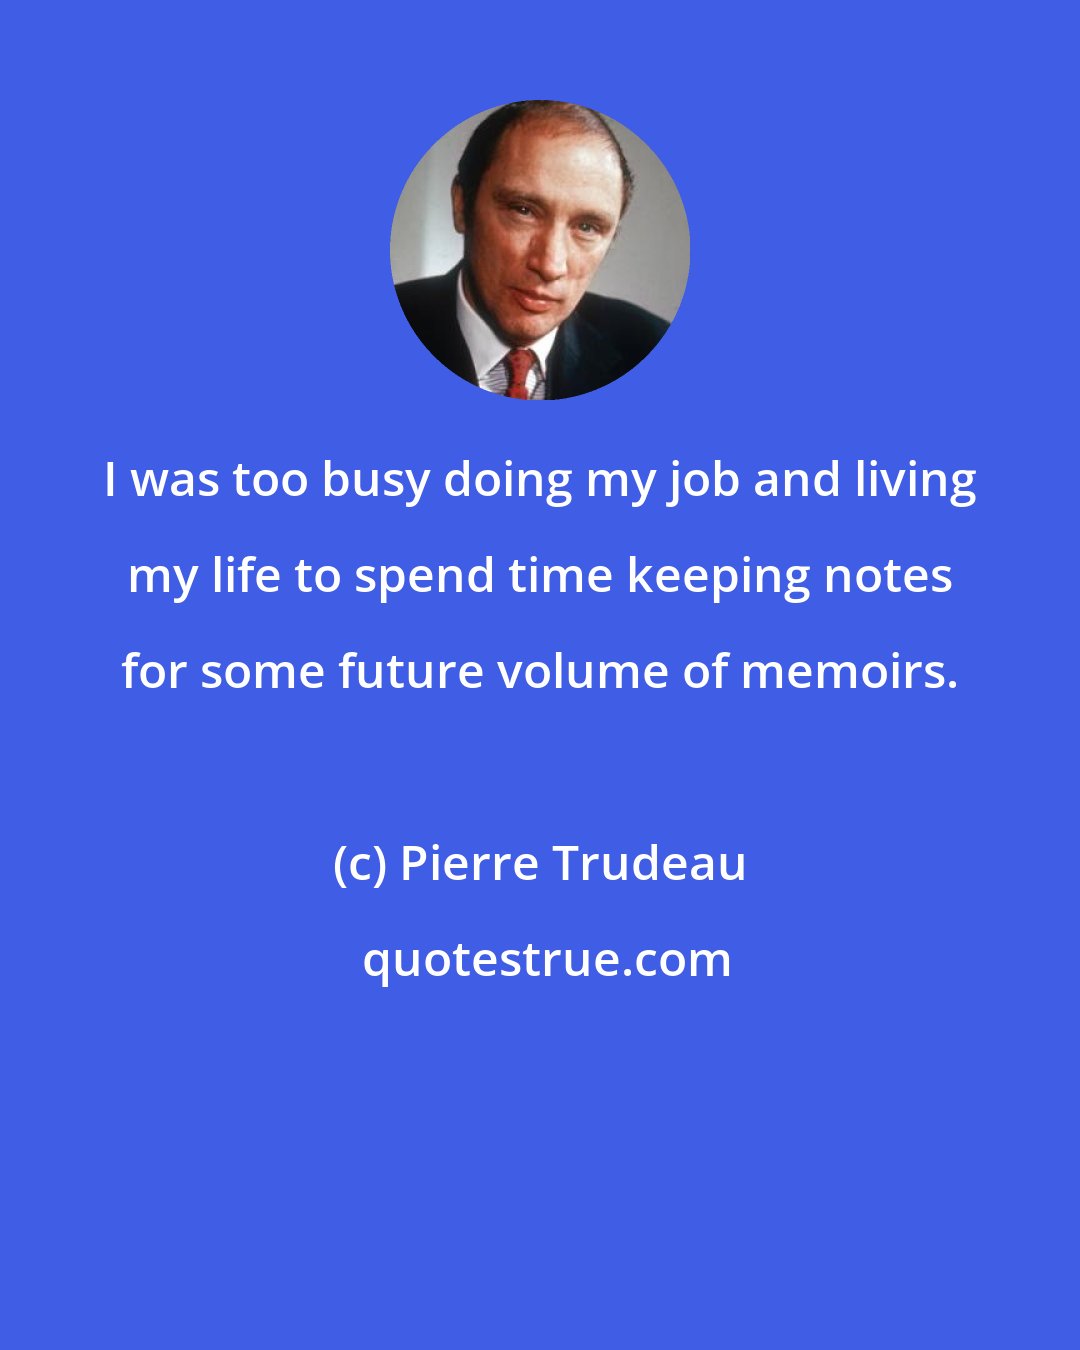 Pierre Trudeau: I was too busy doing my job and living my life to spend time keeping notes for some future volume of memoirs.